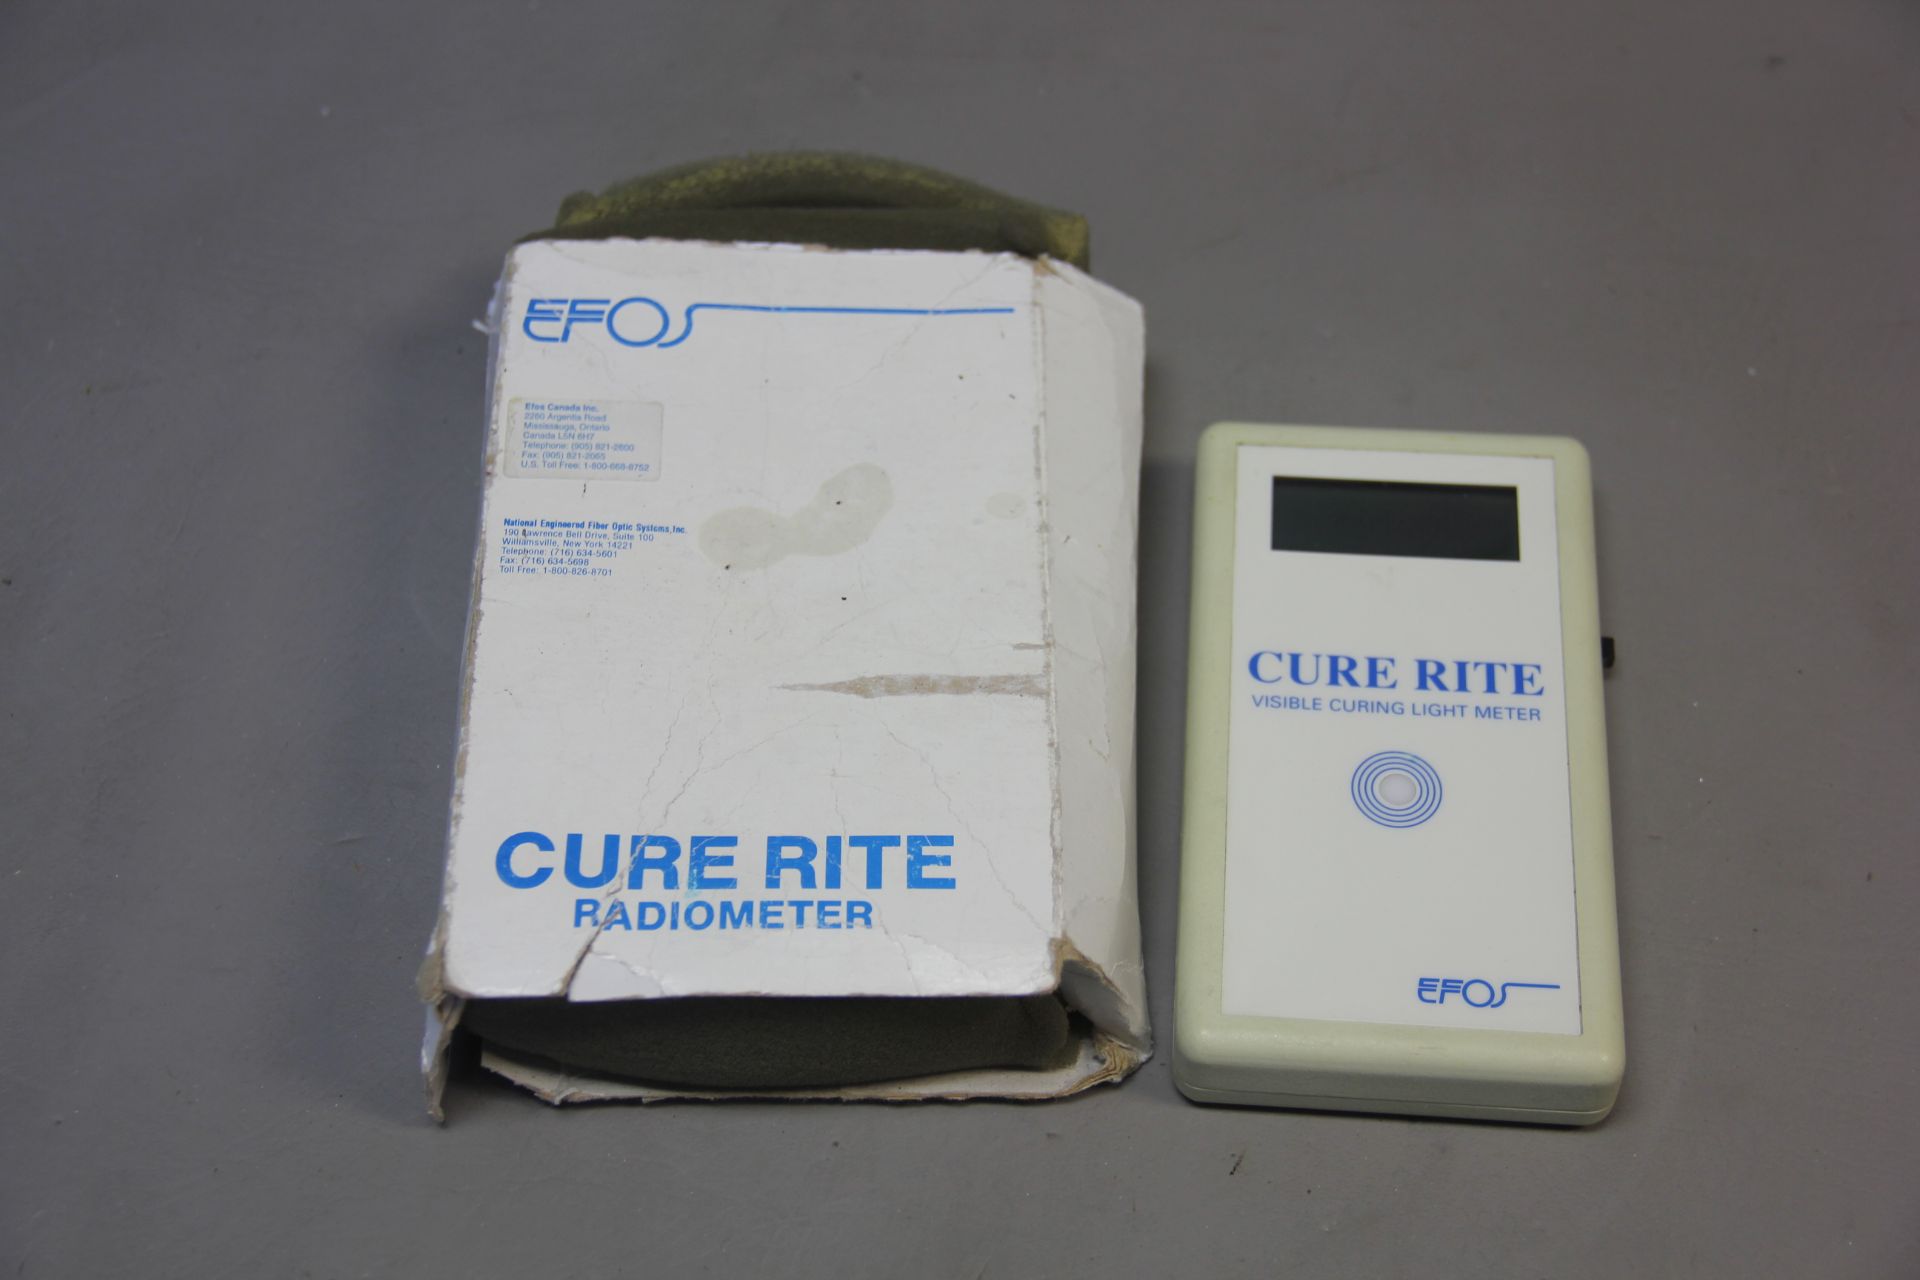 EFOS CURE RITE RADIOMETER VISIBLE CURING LIGHT METER